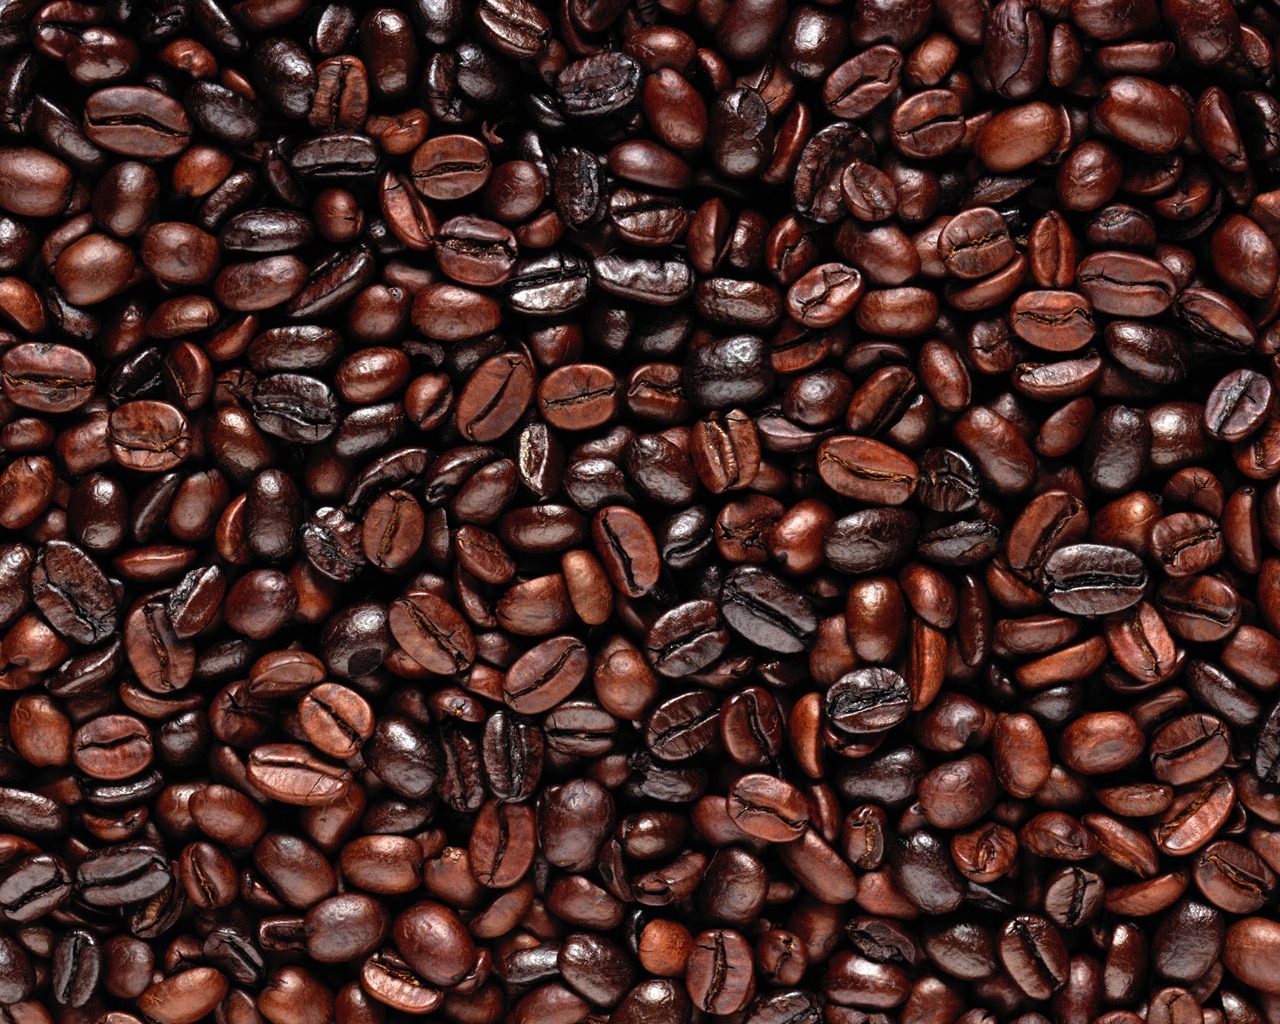 Coffee feature wallpaper (11) #9 - 1280x1024